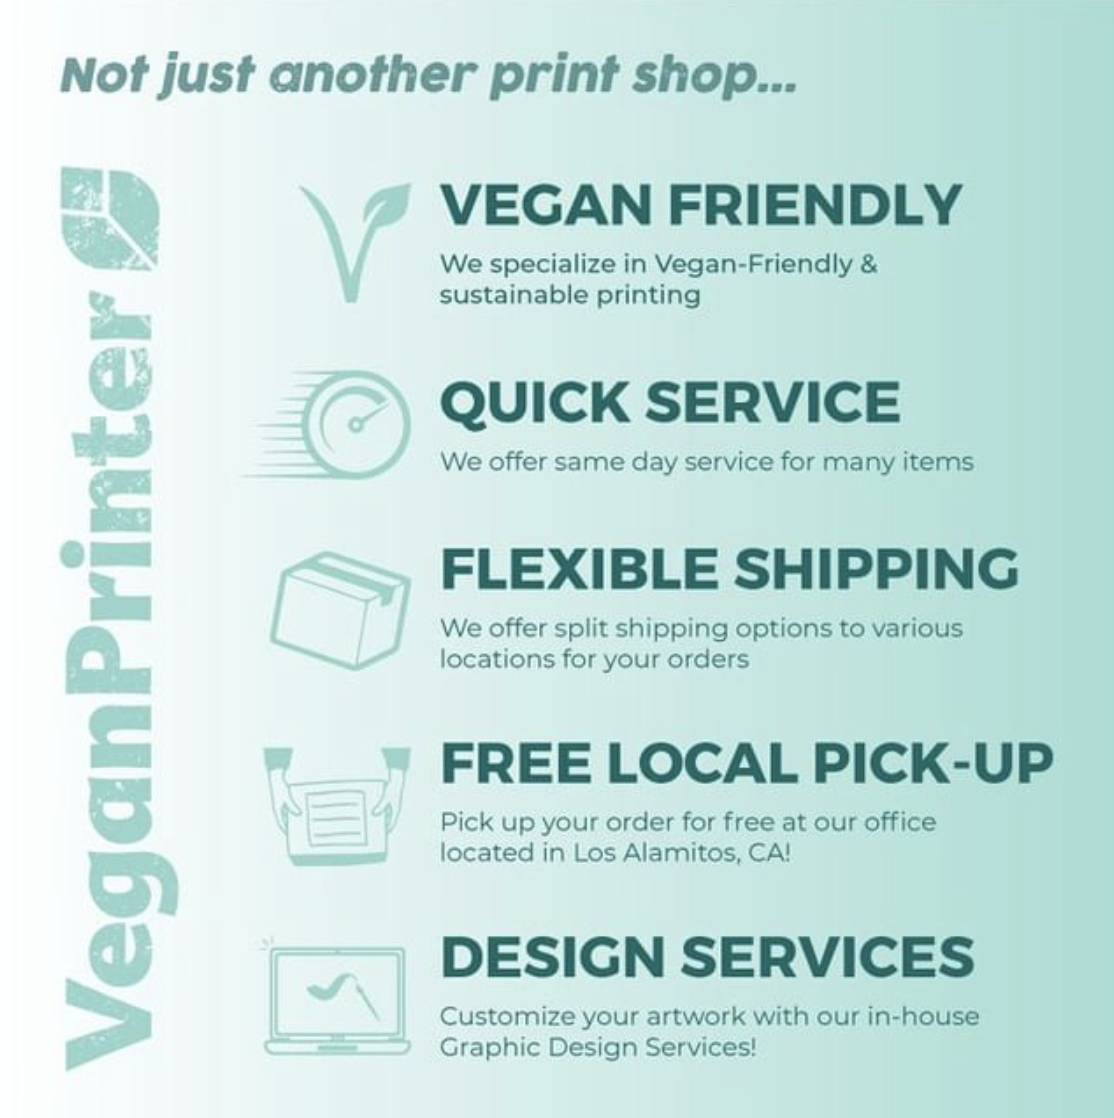 Not just another print shop